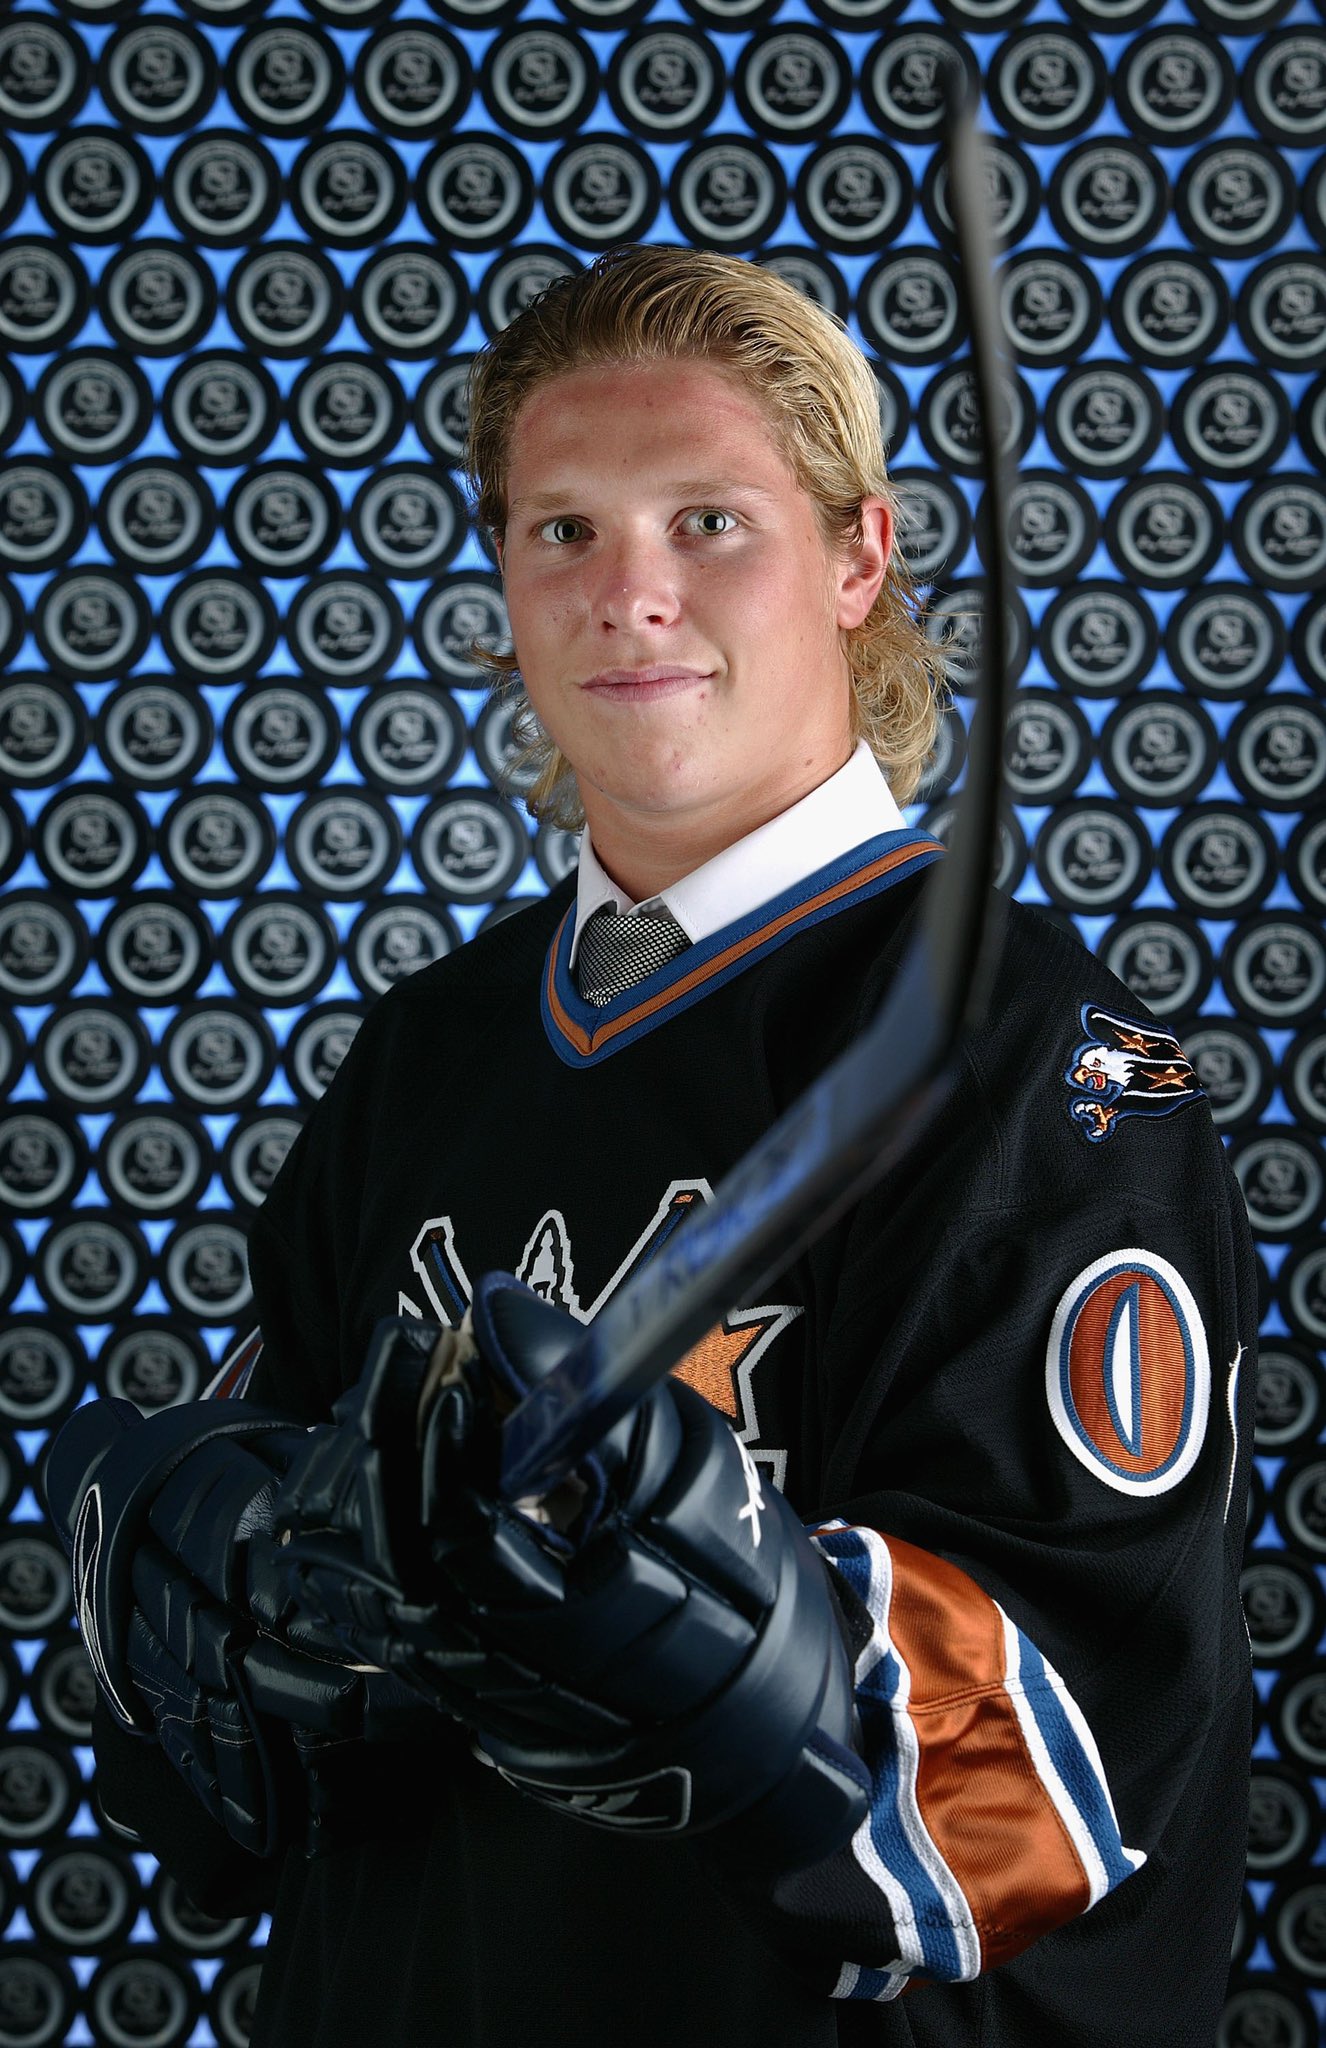 On this day in 2006, Washington drafted Nicklas Backstrom with